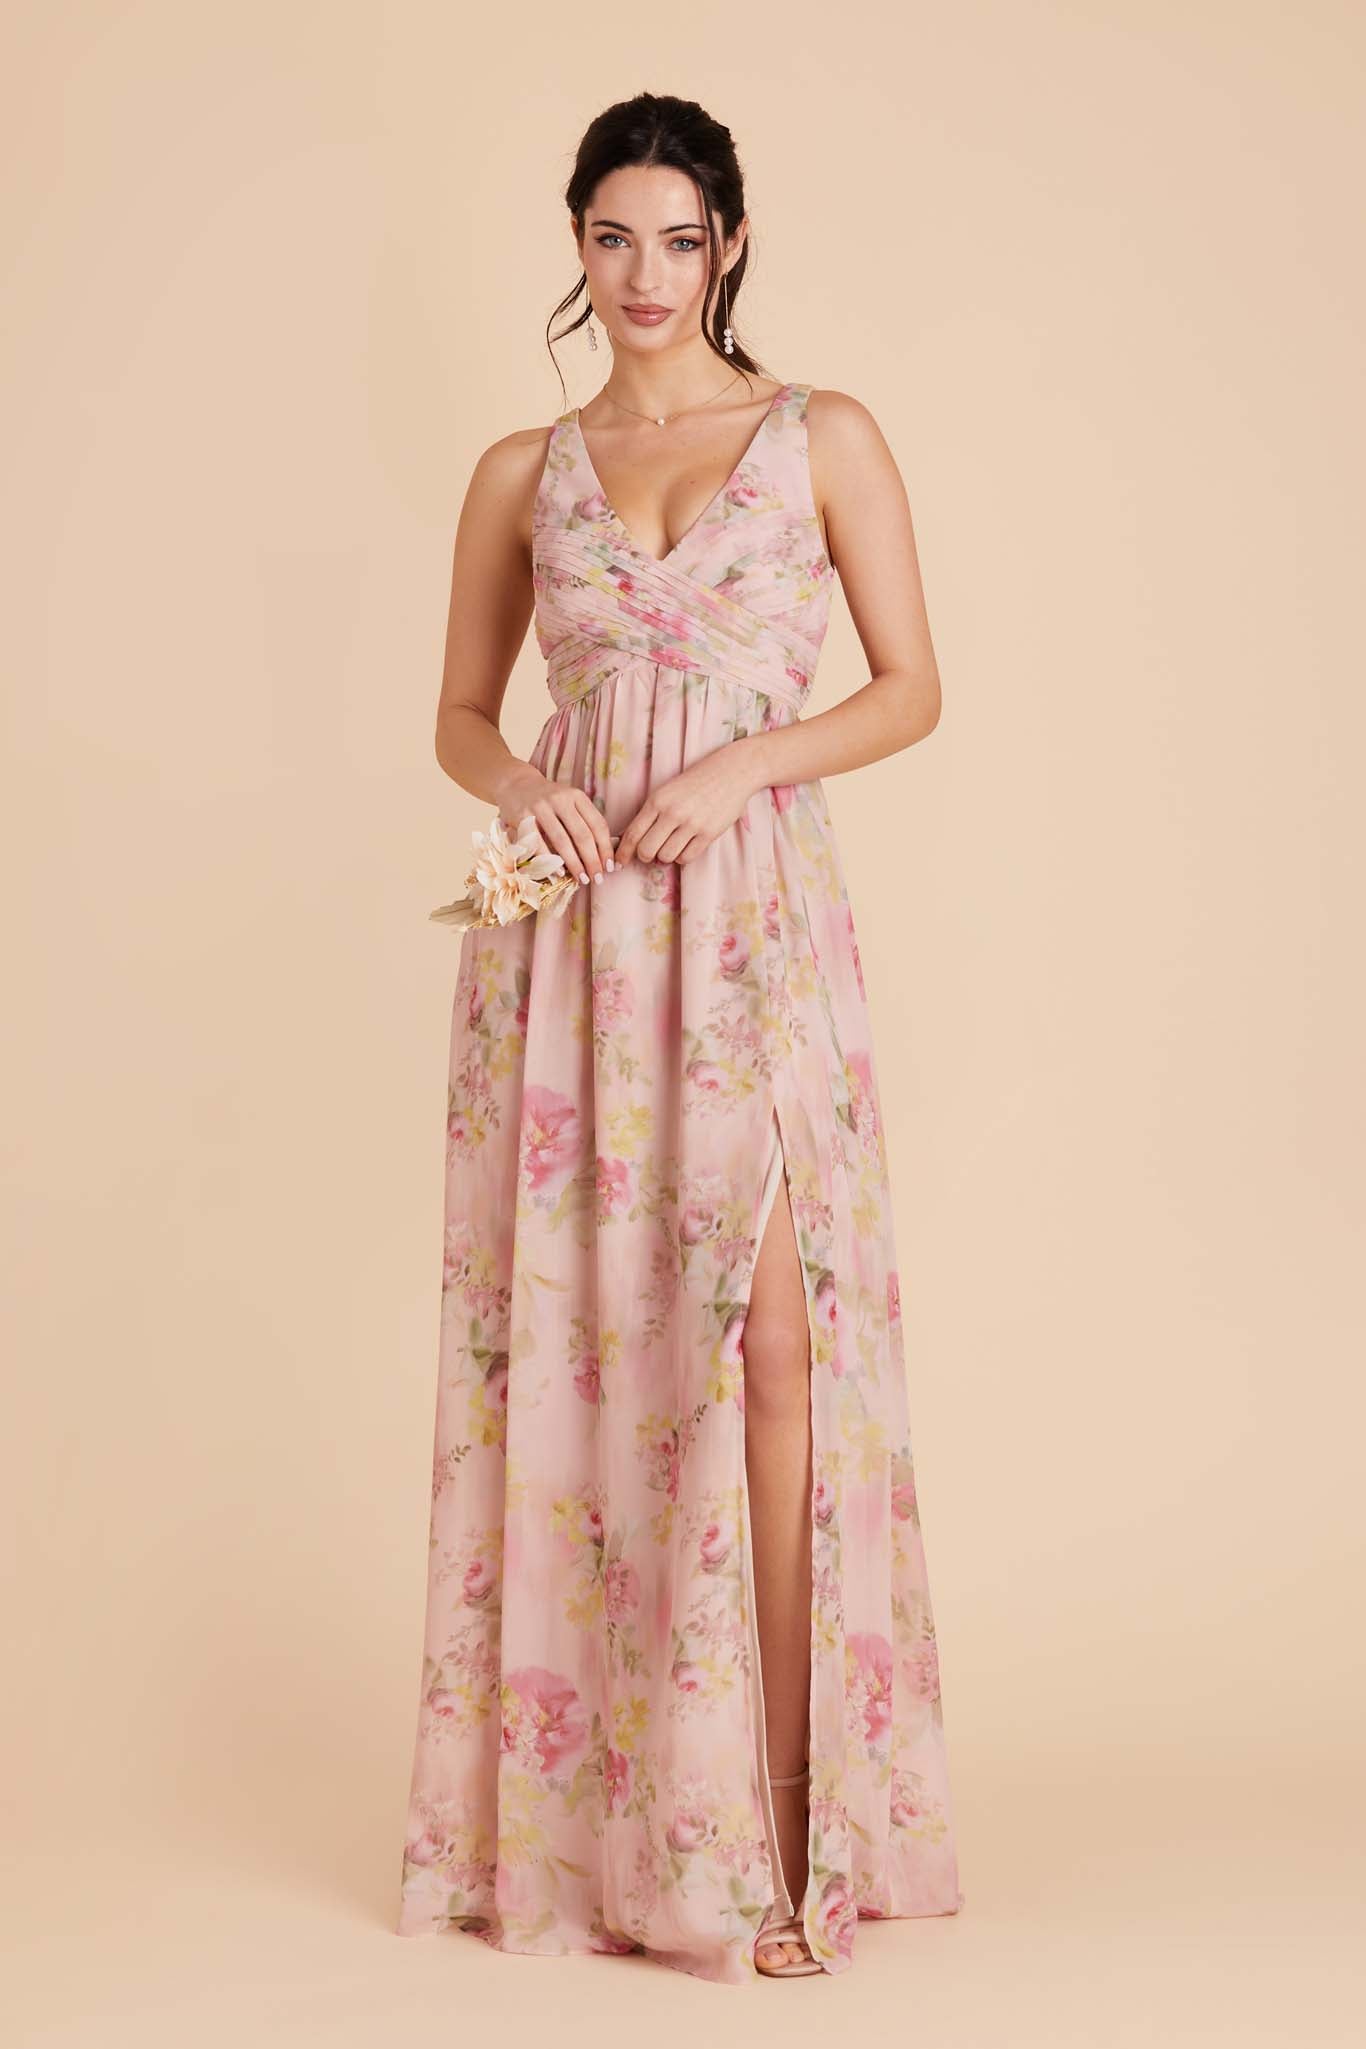 Vintage Pink Floral Laurie Empire Dress by Birdy Grey